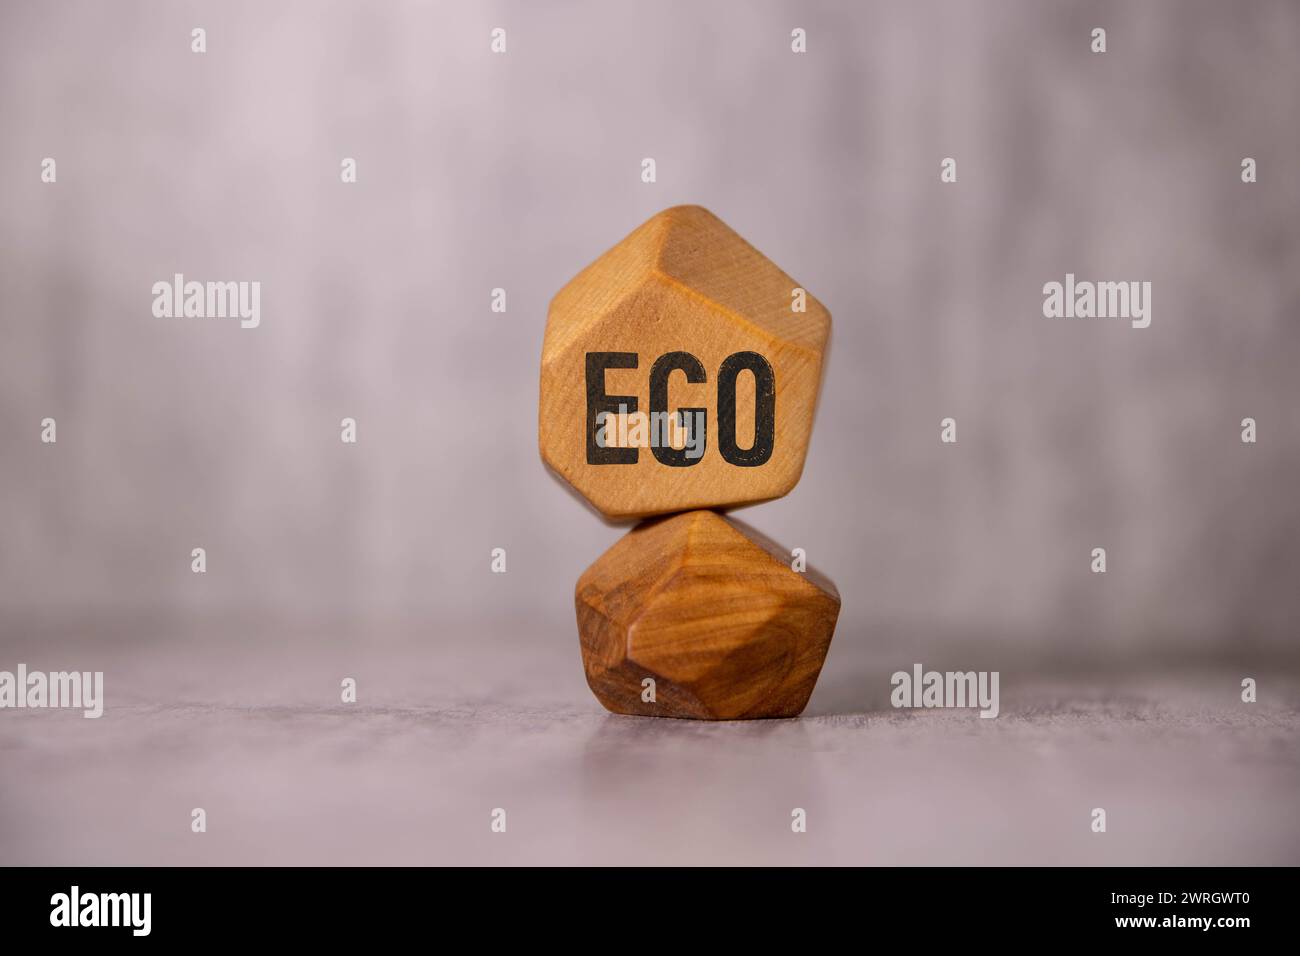 The word ego written in cubes on a wooden background Stock Photo